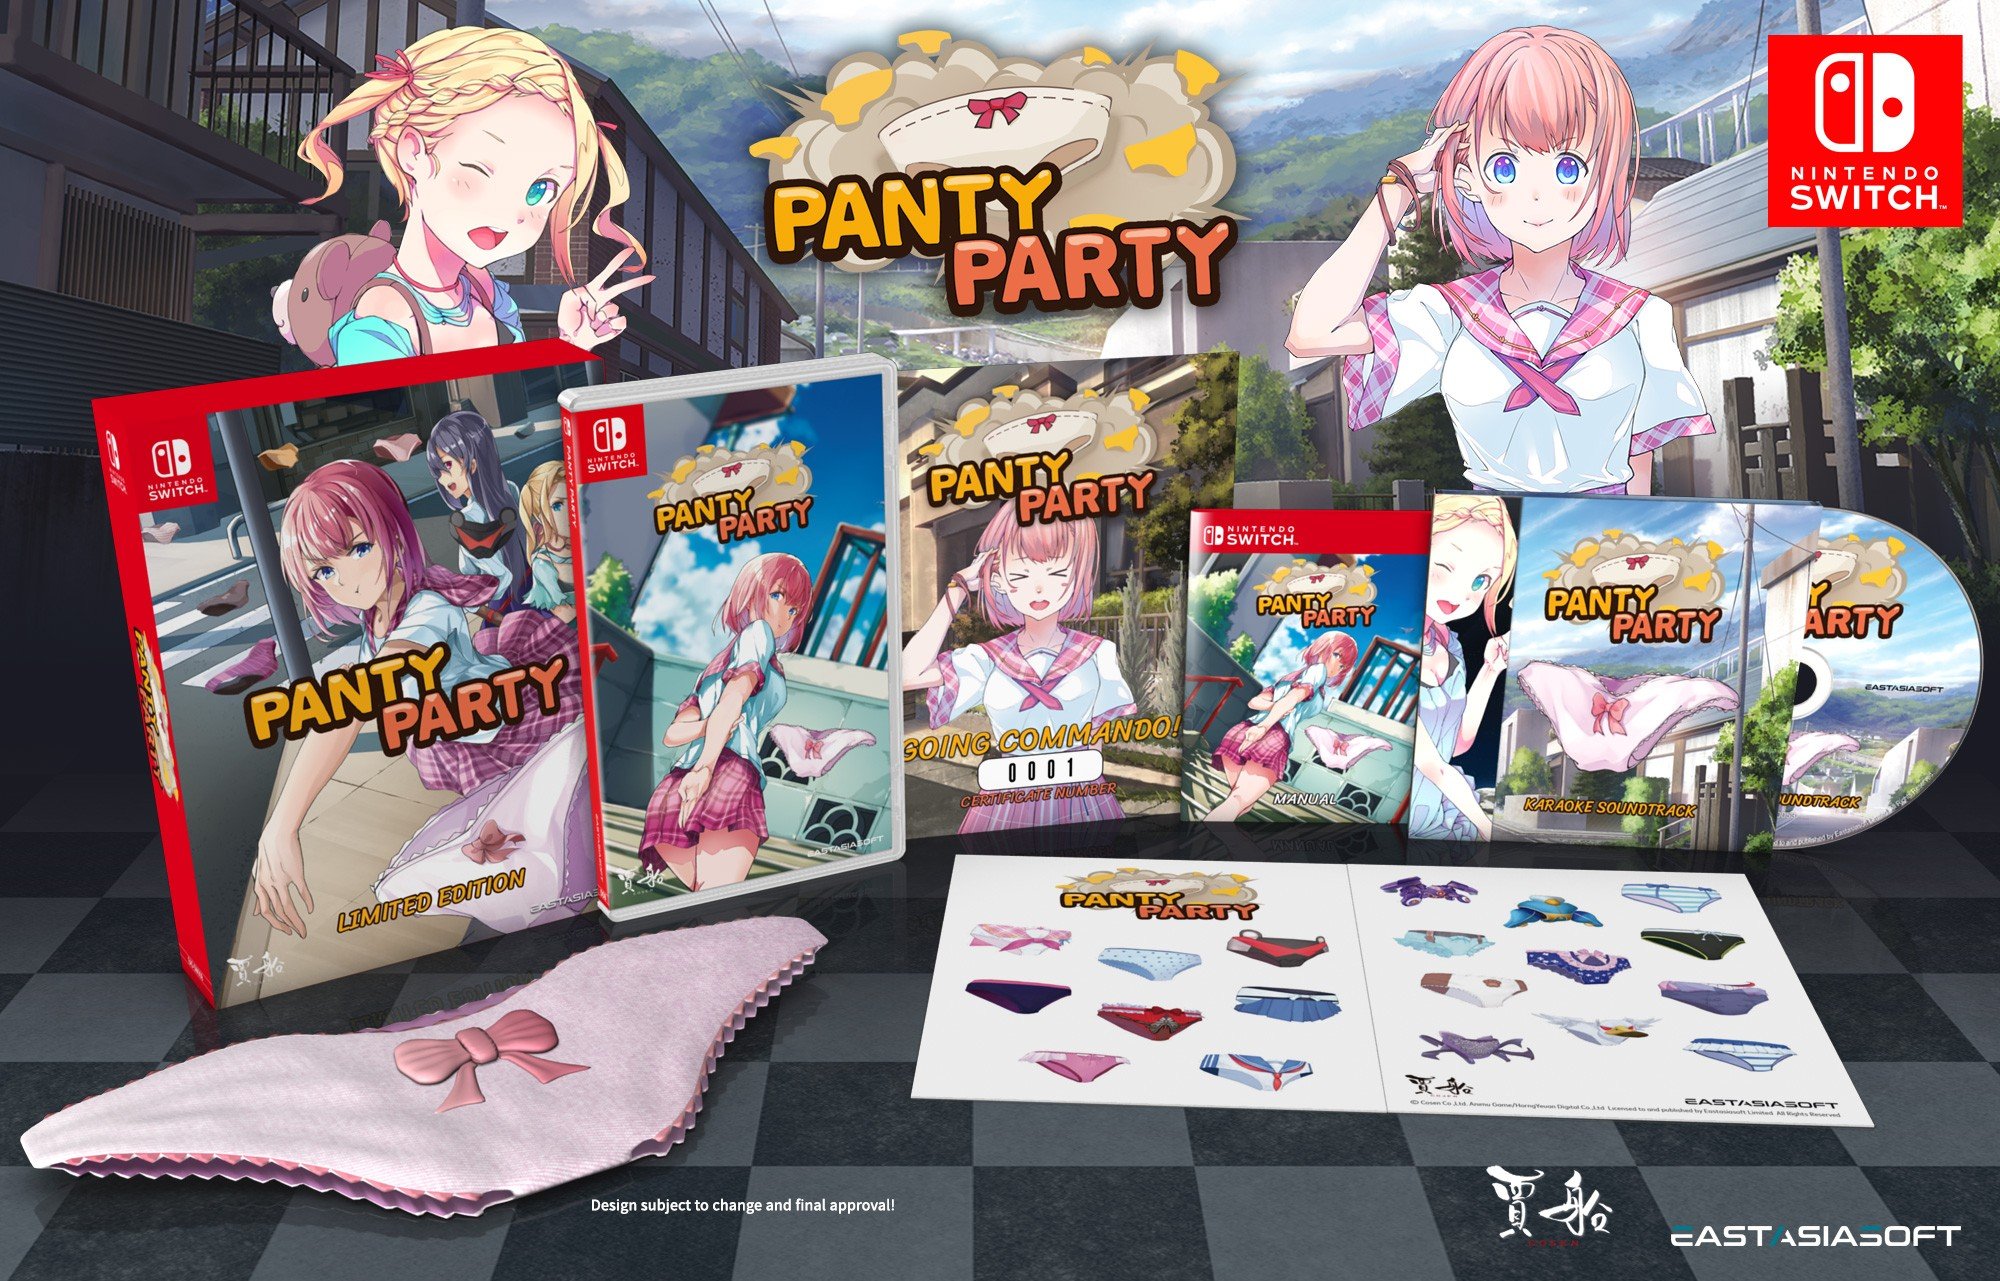 https://www.gematsu.com/wp-content/uploads/2019/04/Panty-Party-Physical-Edition_04-25-19.jpg